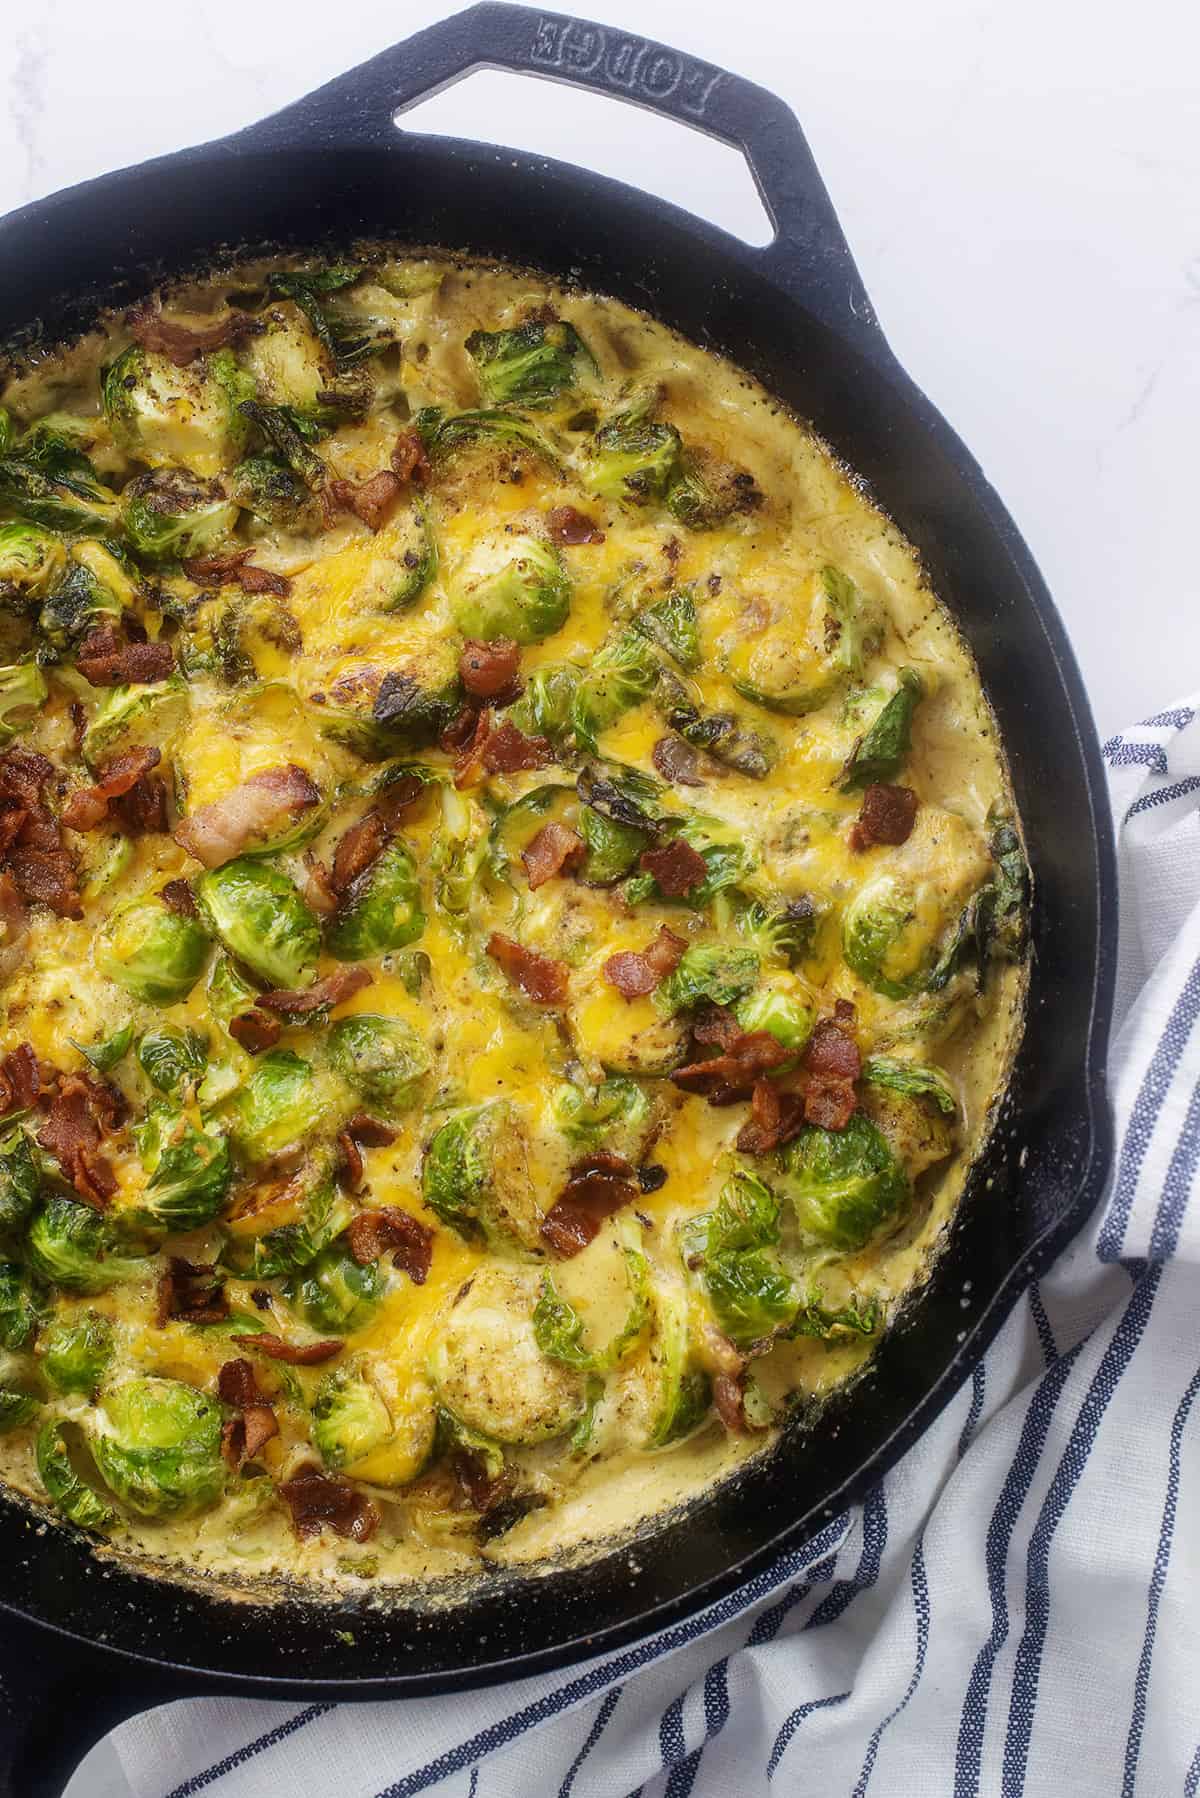 Brussel sprout casserole in cast iron skillet.